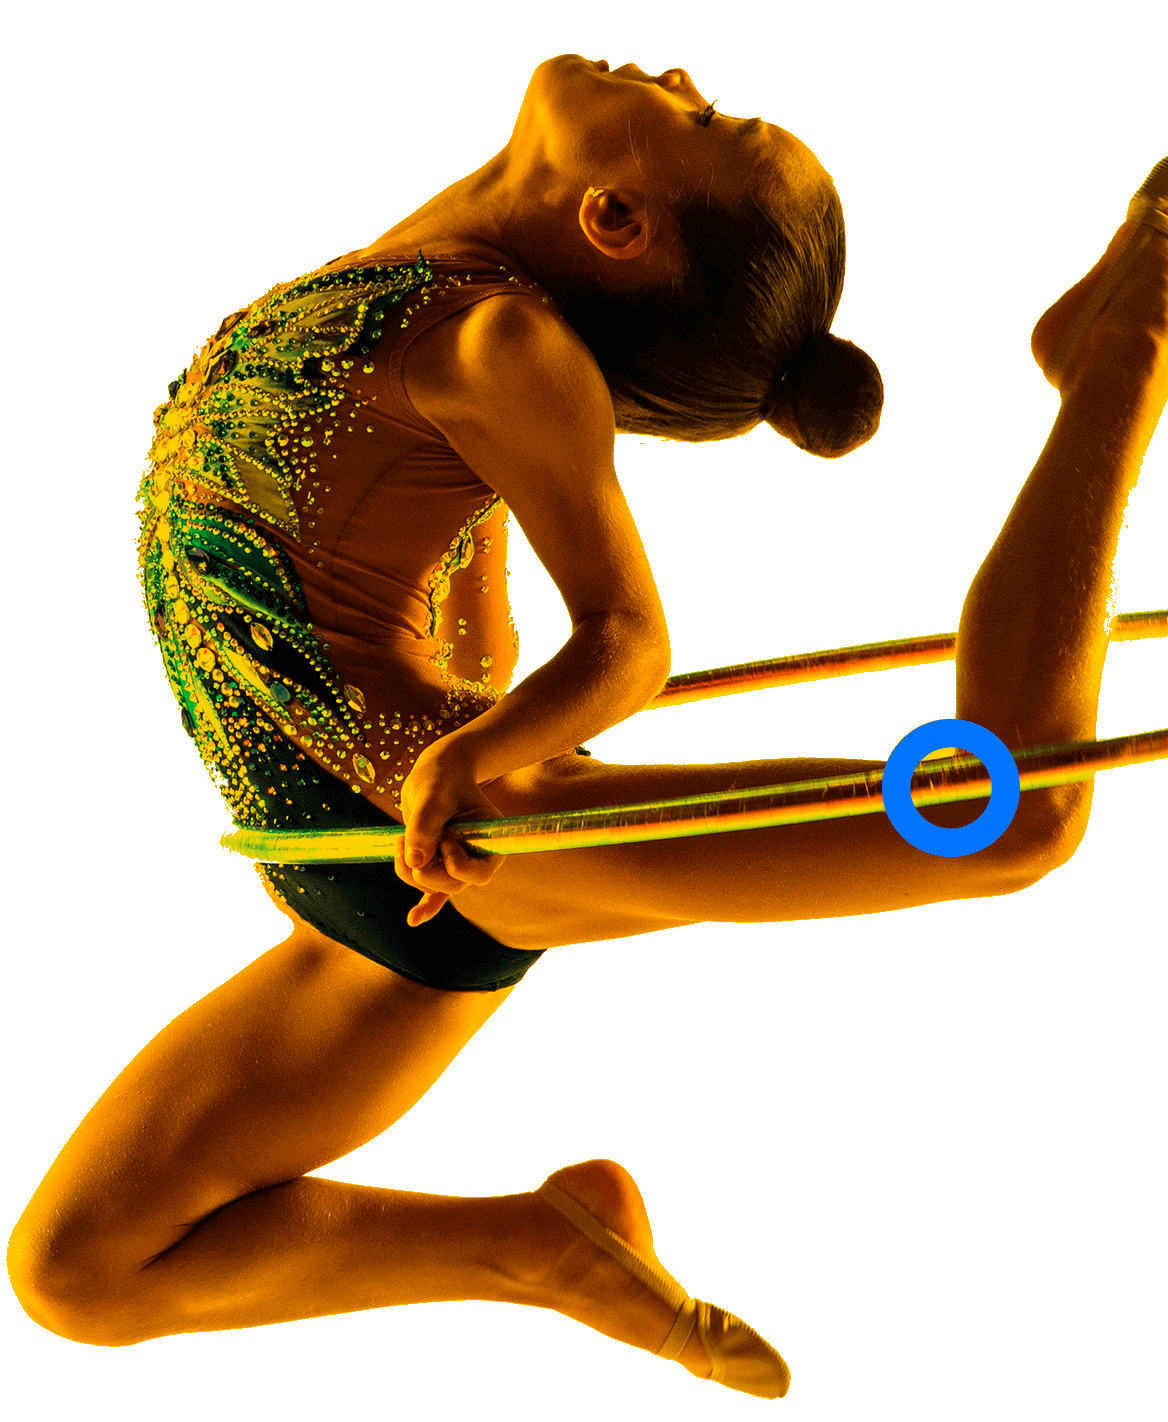 In the picture, a female gymnast executes a ring routine. She is bending her legs and looking up.